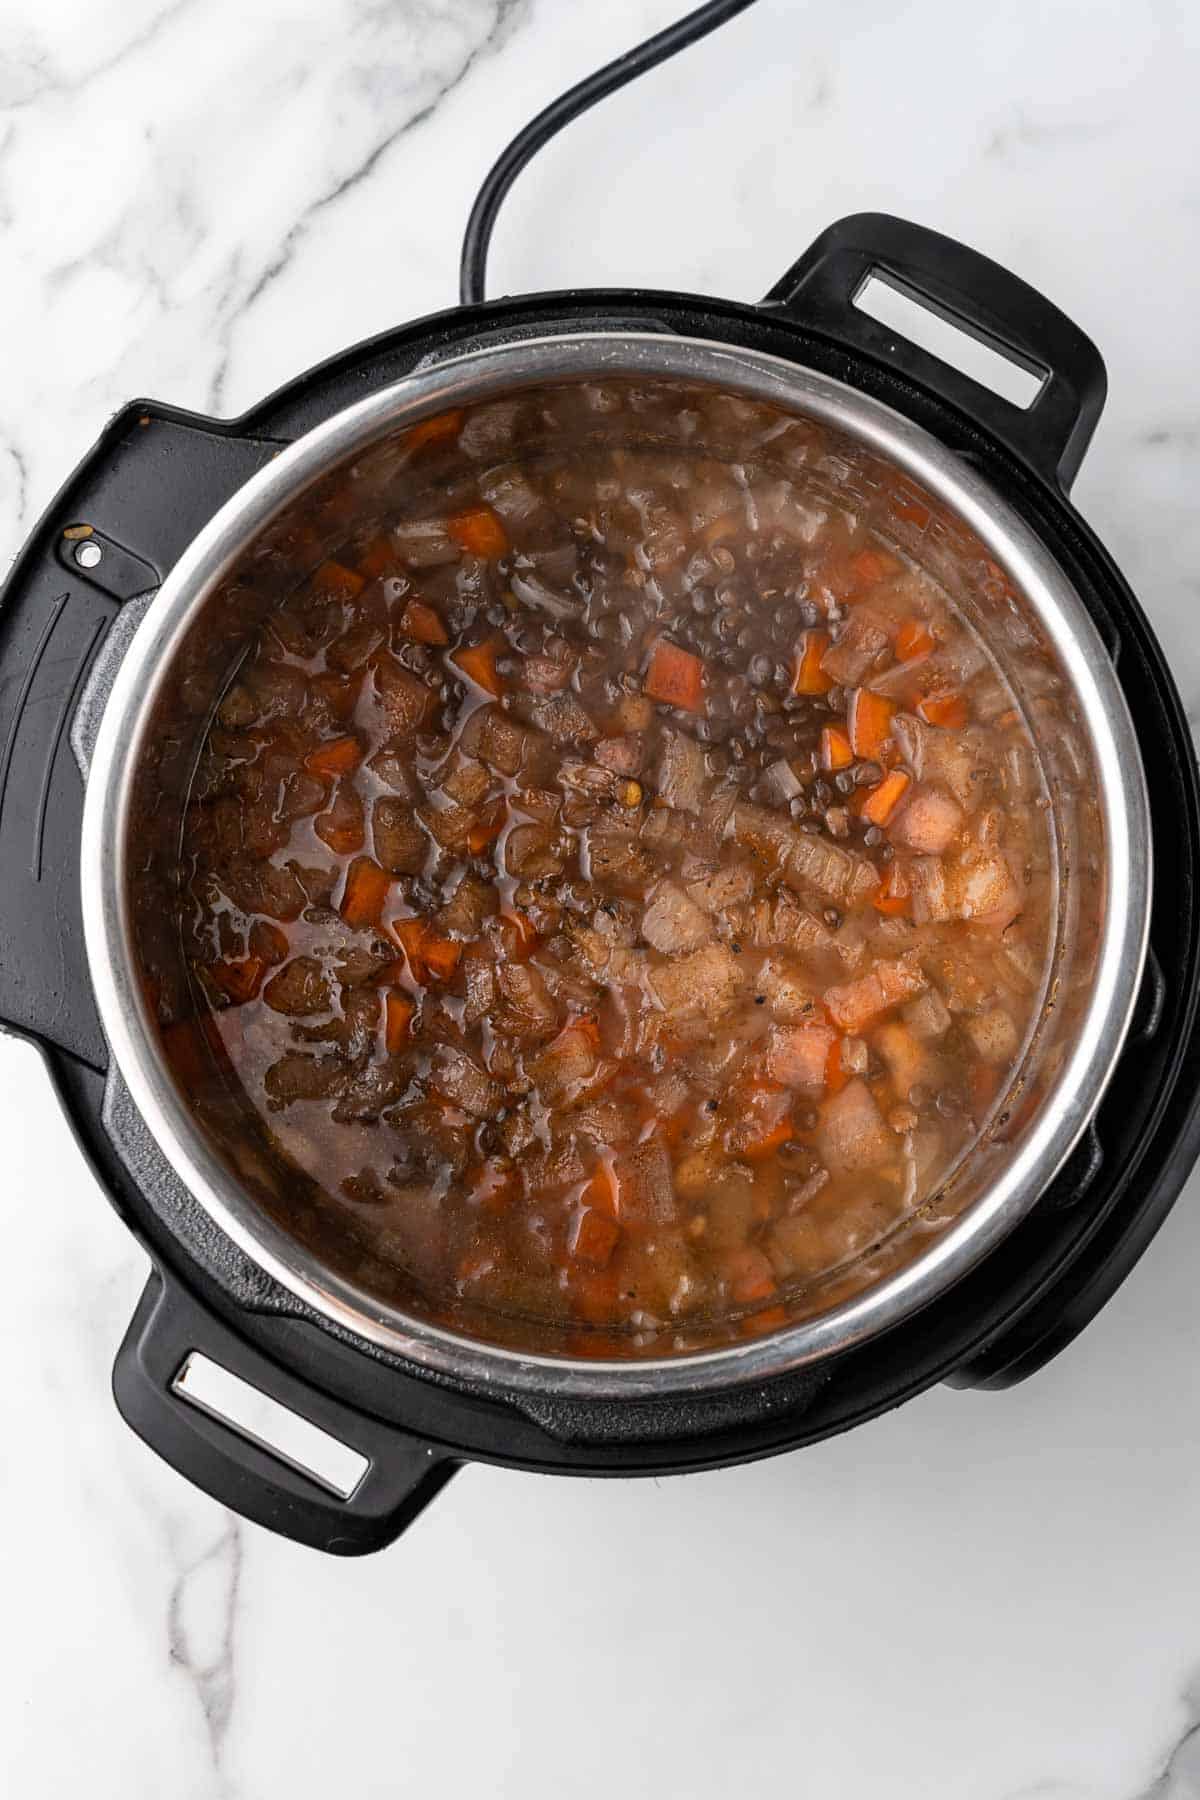 Lentil soup after cooking in the instant pot